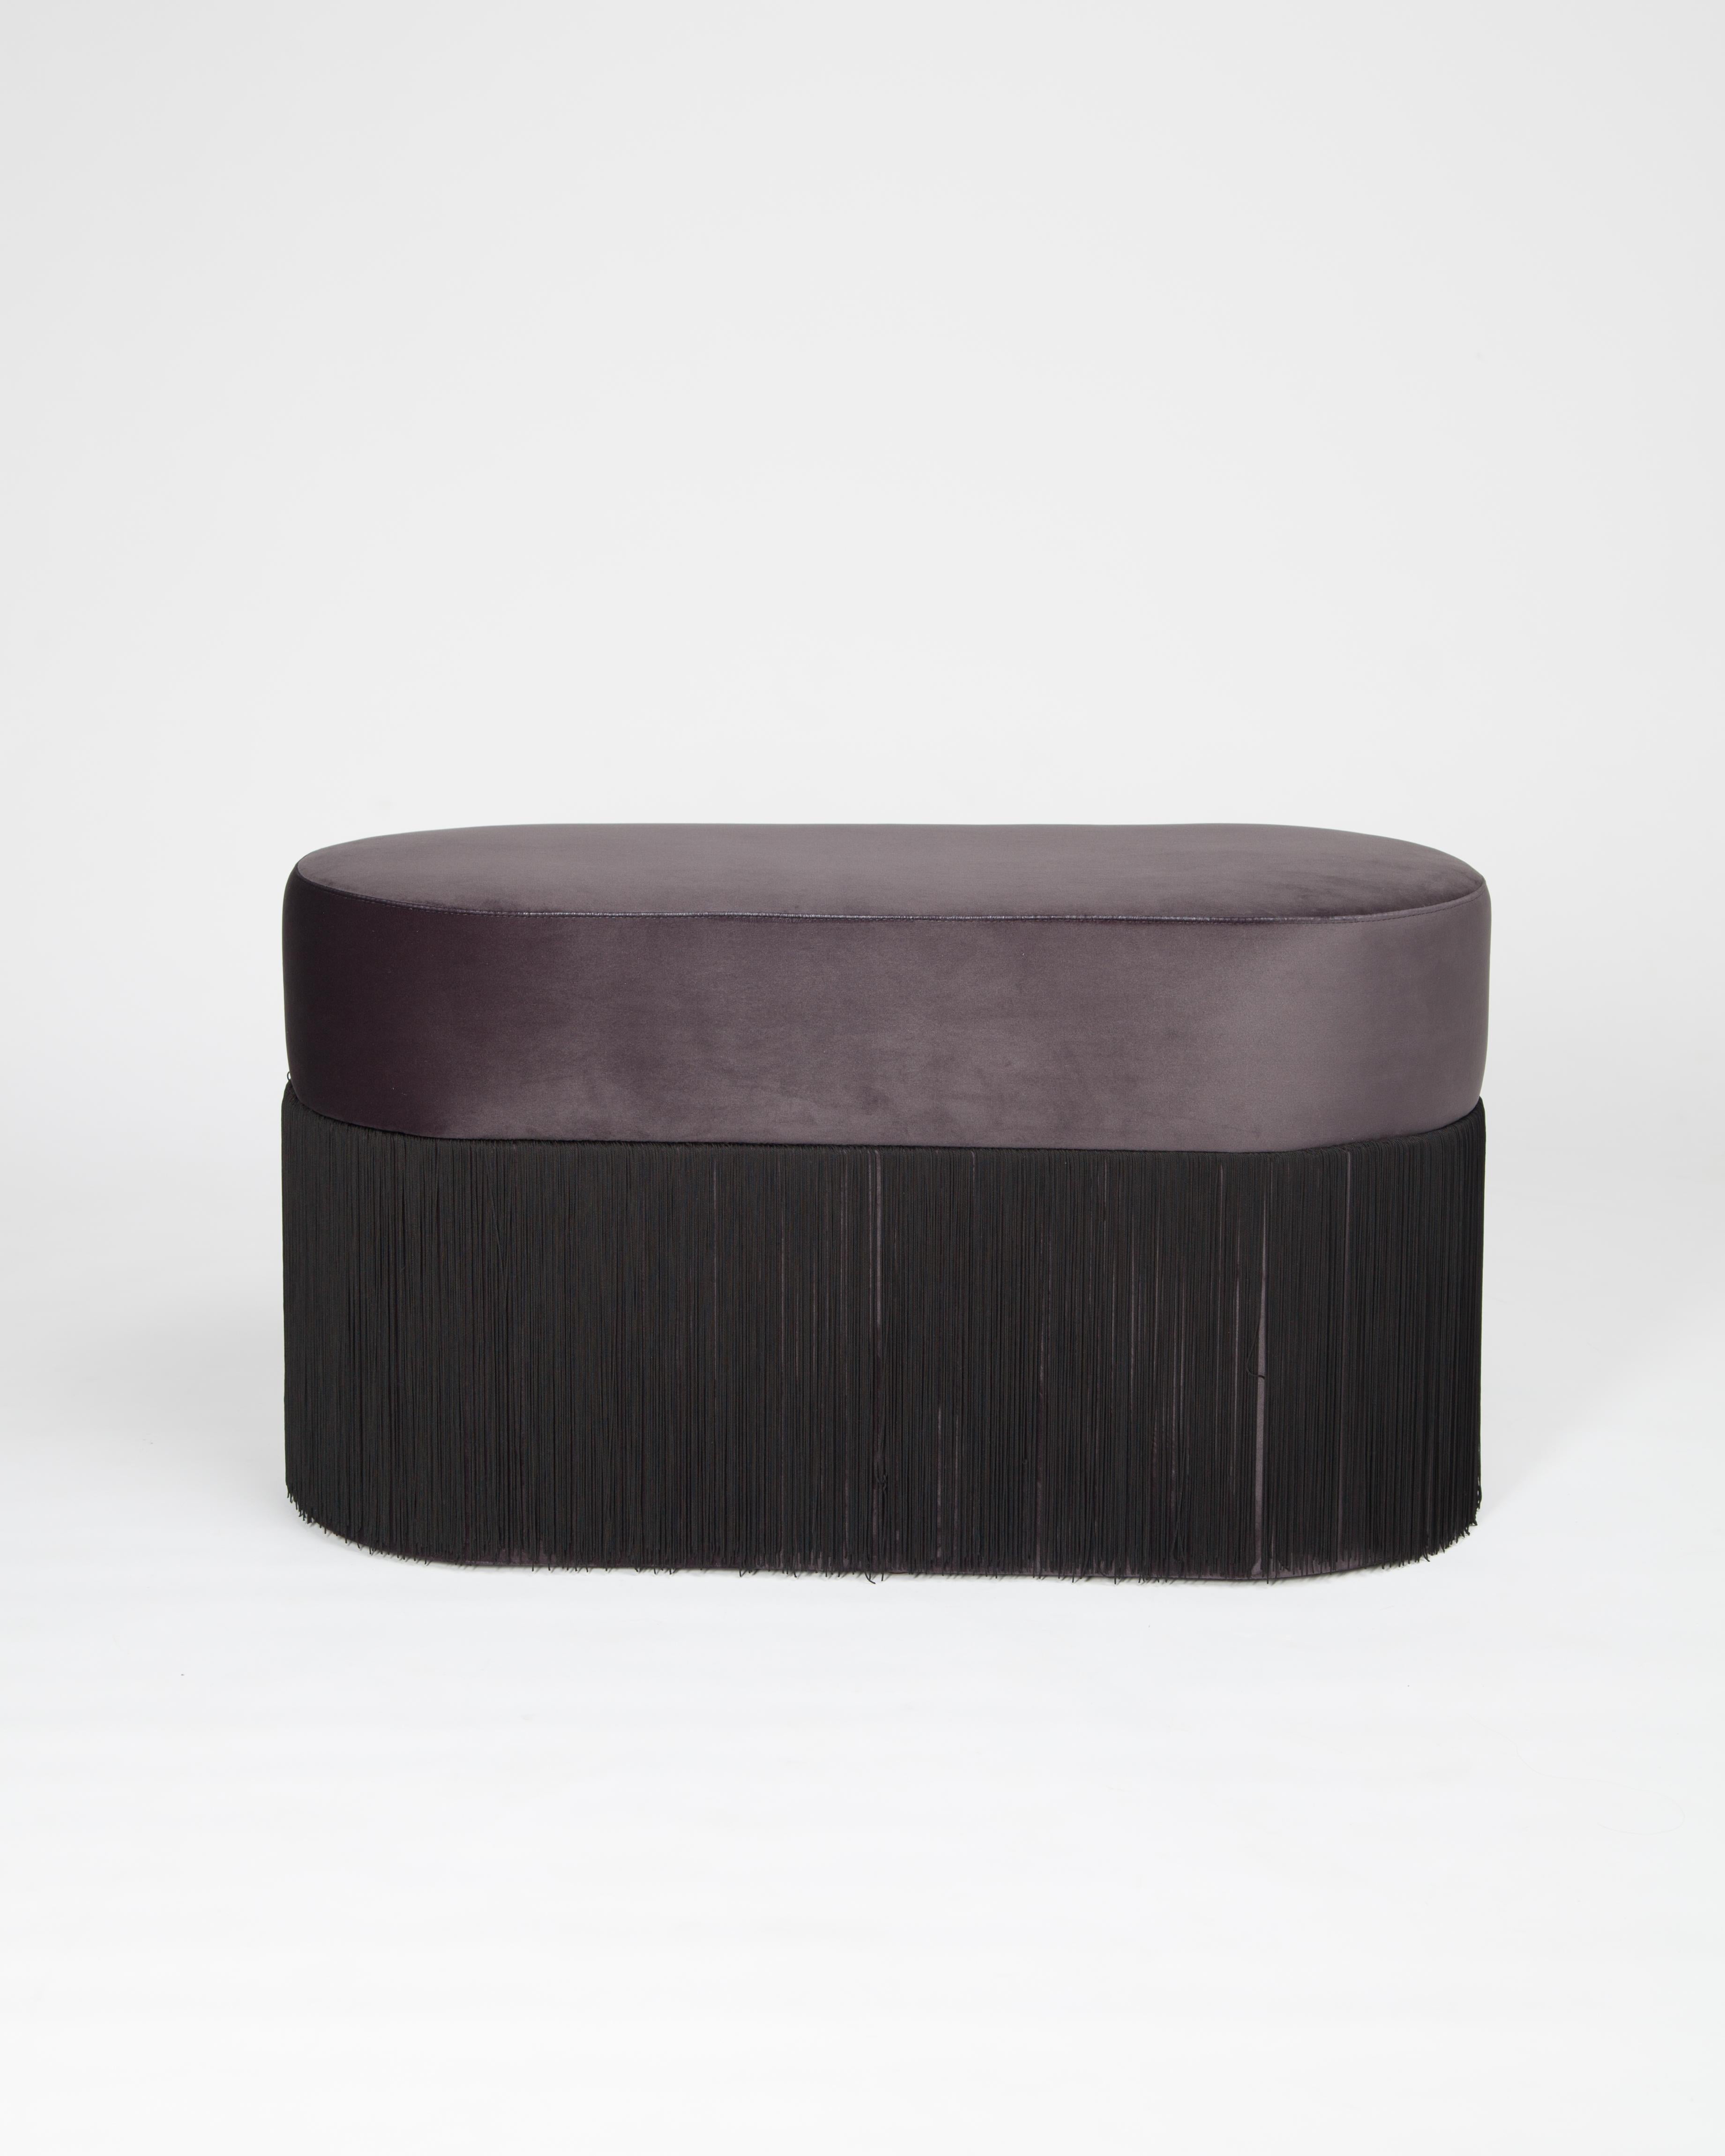 Pouf pill L by Houtique
Dimensions: H 45 x 80 x 35 cm
Materials: Velvet upholstery and 30cm fringes

Pill Pouf L
Art-deco style pouf with wood structure and velvet fabric.
2 fiber-board discs of 16mm, joined by wooden tufts.
Upholstery Velvet